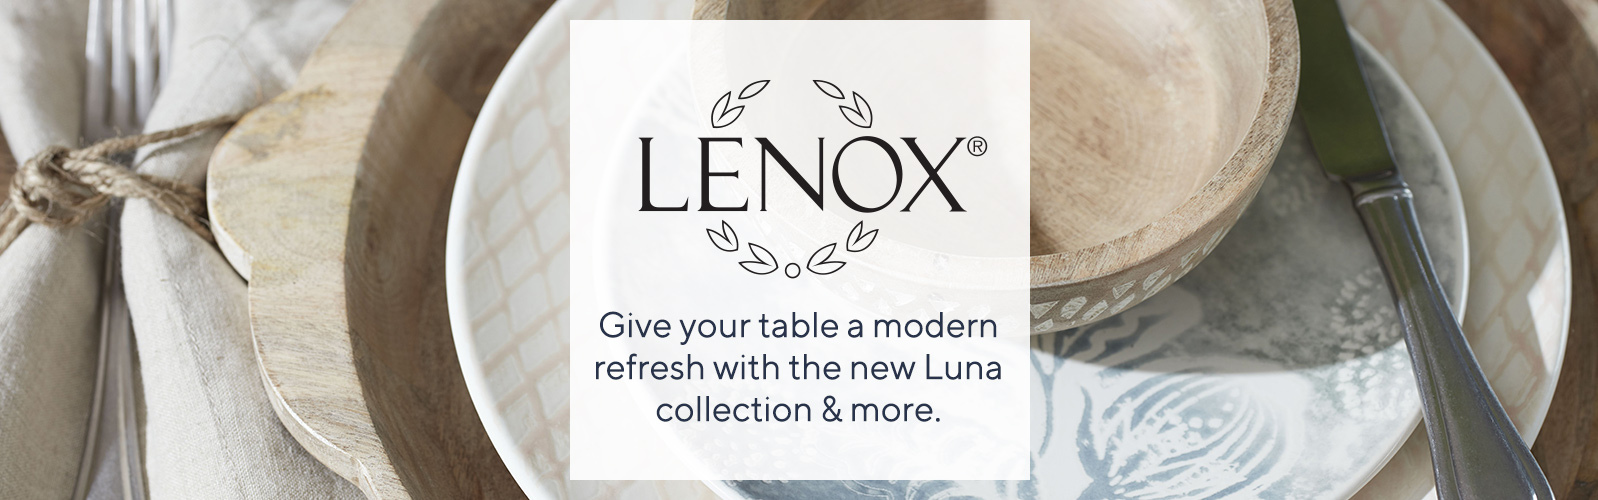 Lenox.  Give your table a modern refresh with the new Luna collection & more.